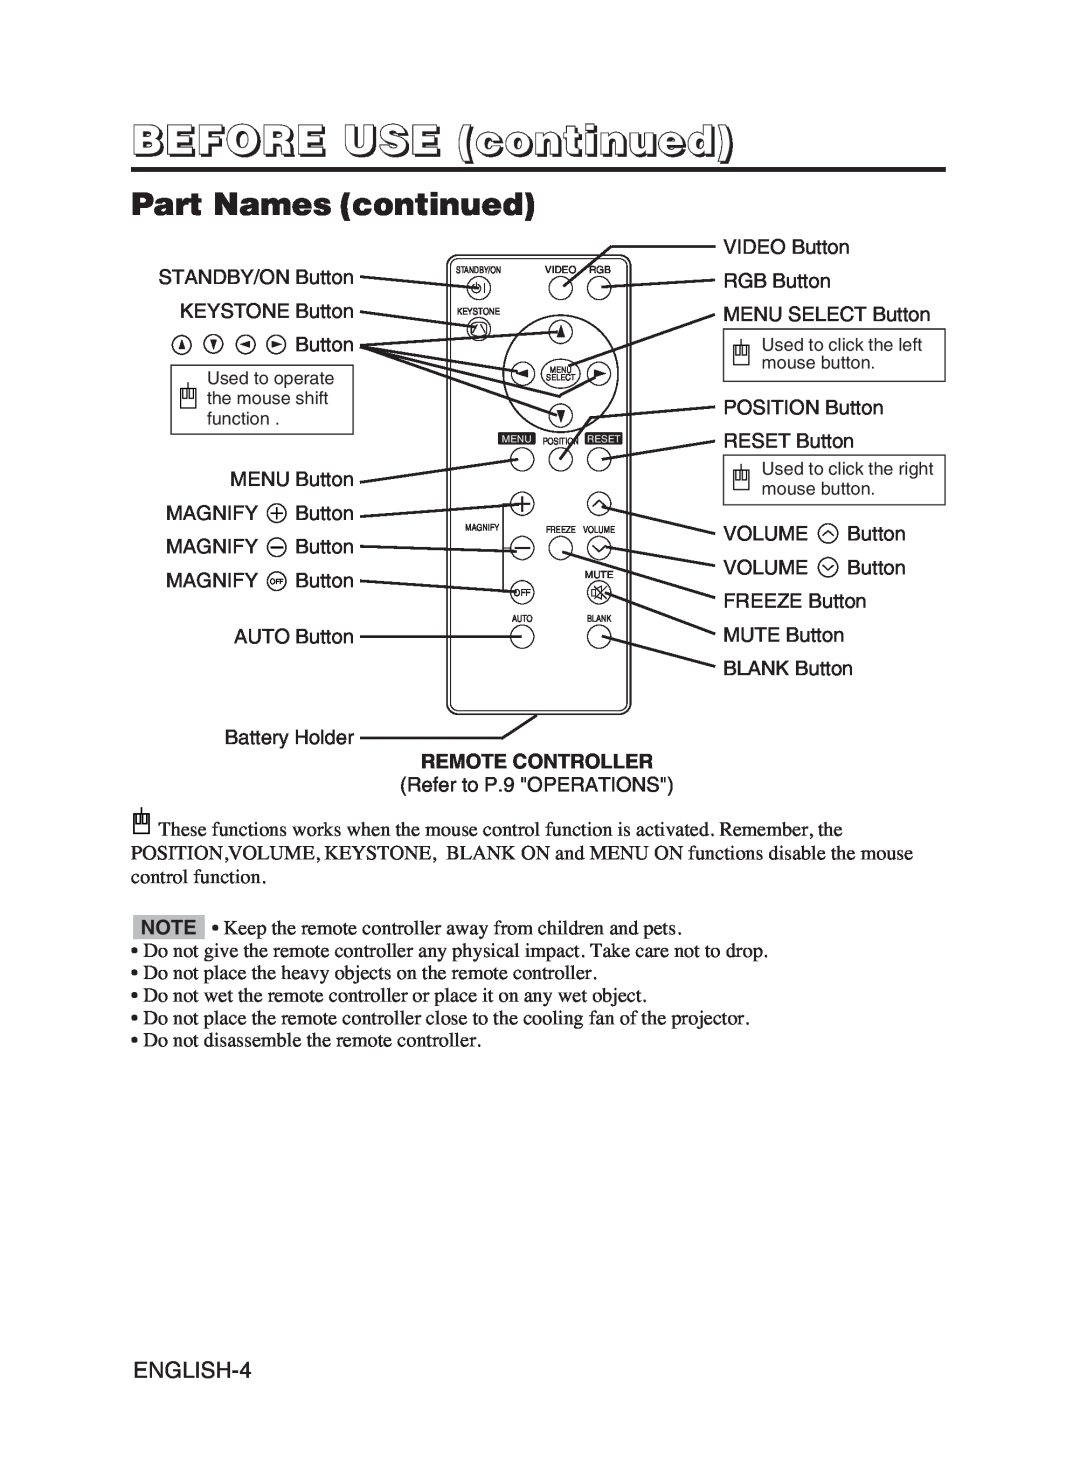 Hitachi CP-S370W user manual Part Names continued, BEFORE USE continued, ENGLISH-4 